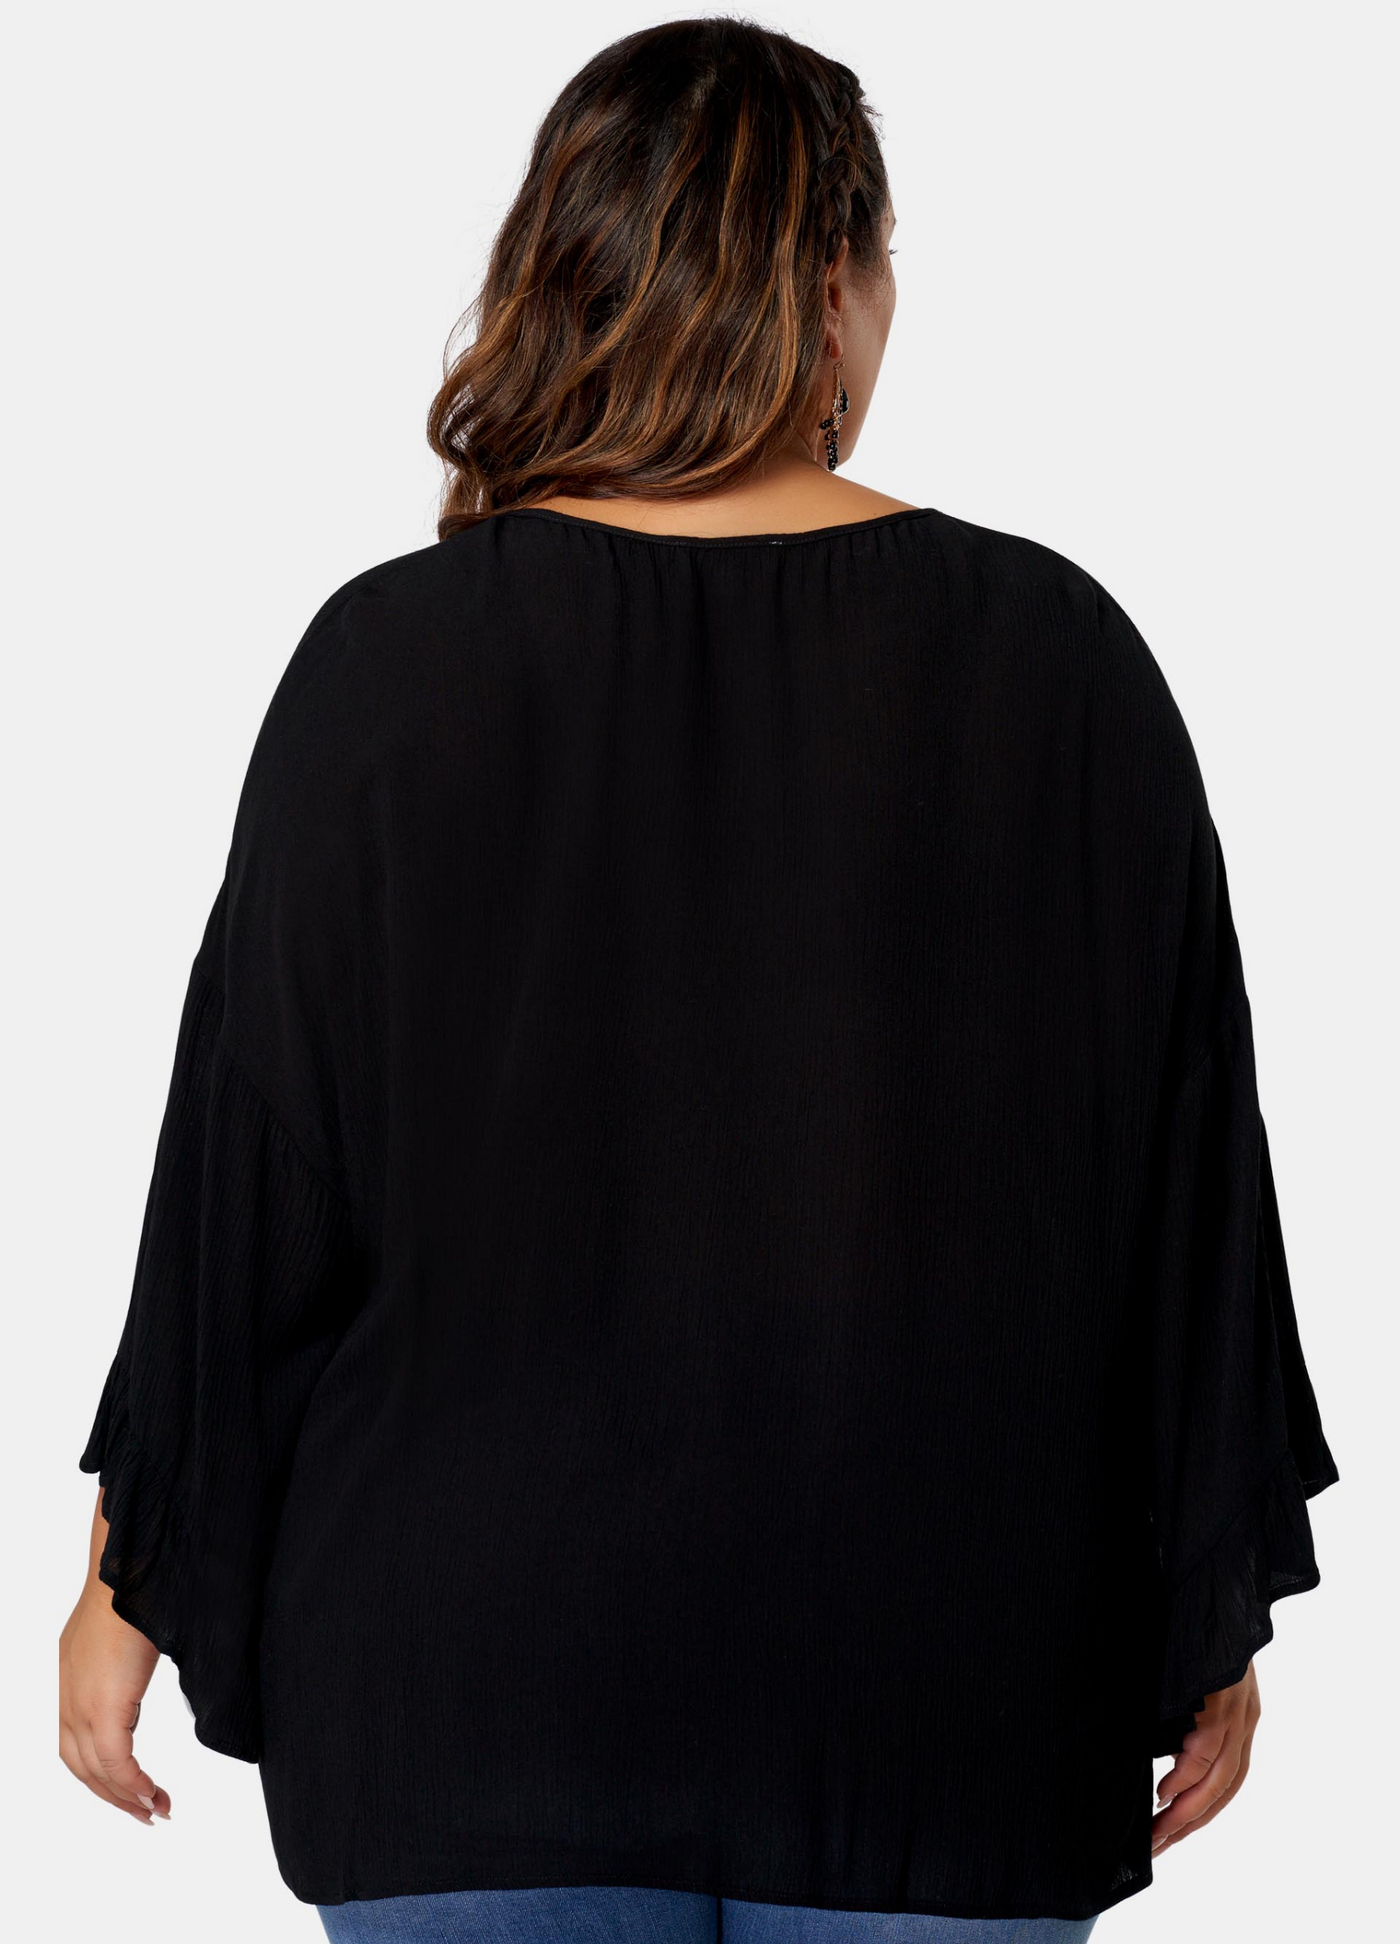 Woman wearing black boho blouse from the back